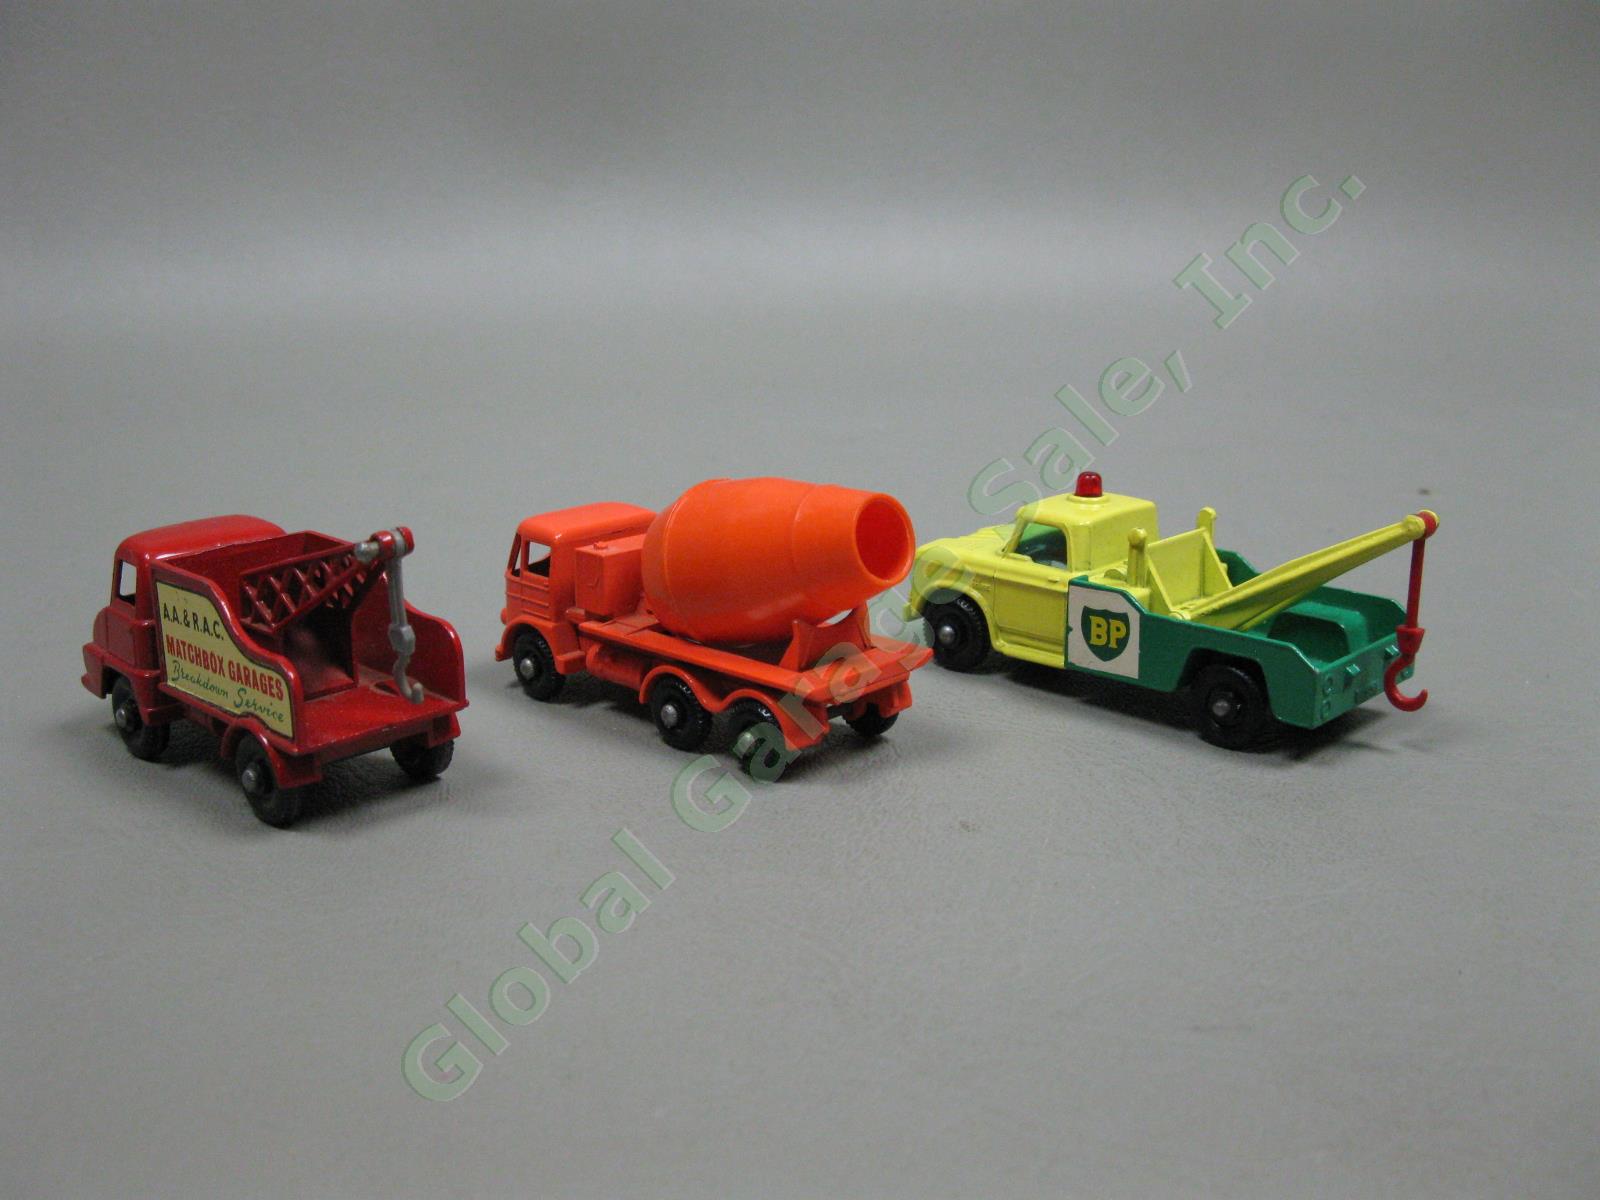 44 Vintage 1950s-1960s Lesney Matchbox Moko Toy Car Lot + Carrying Case EXC COND 18